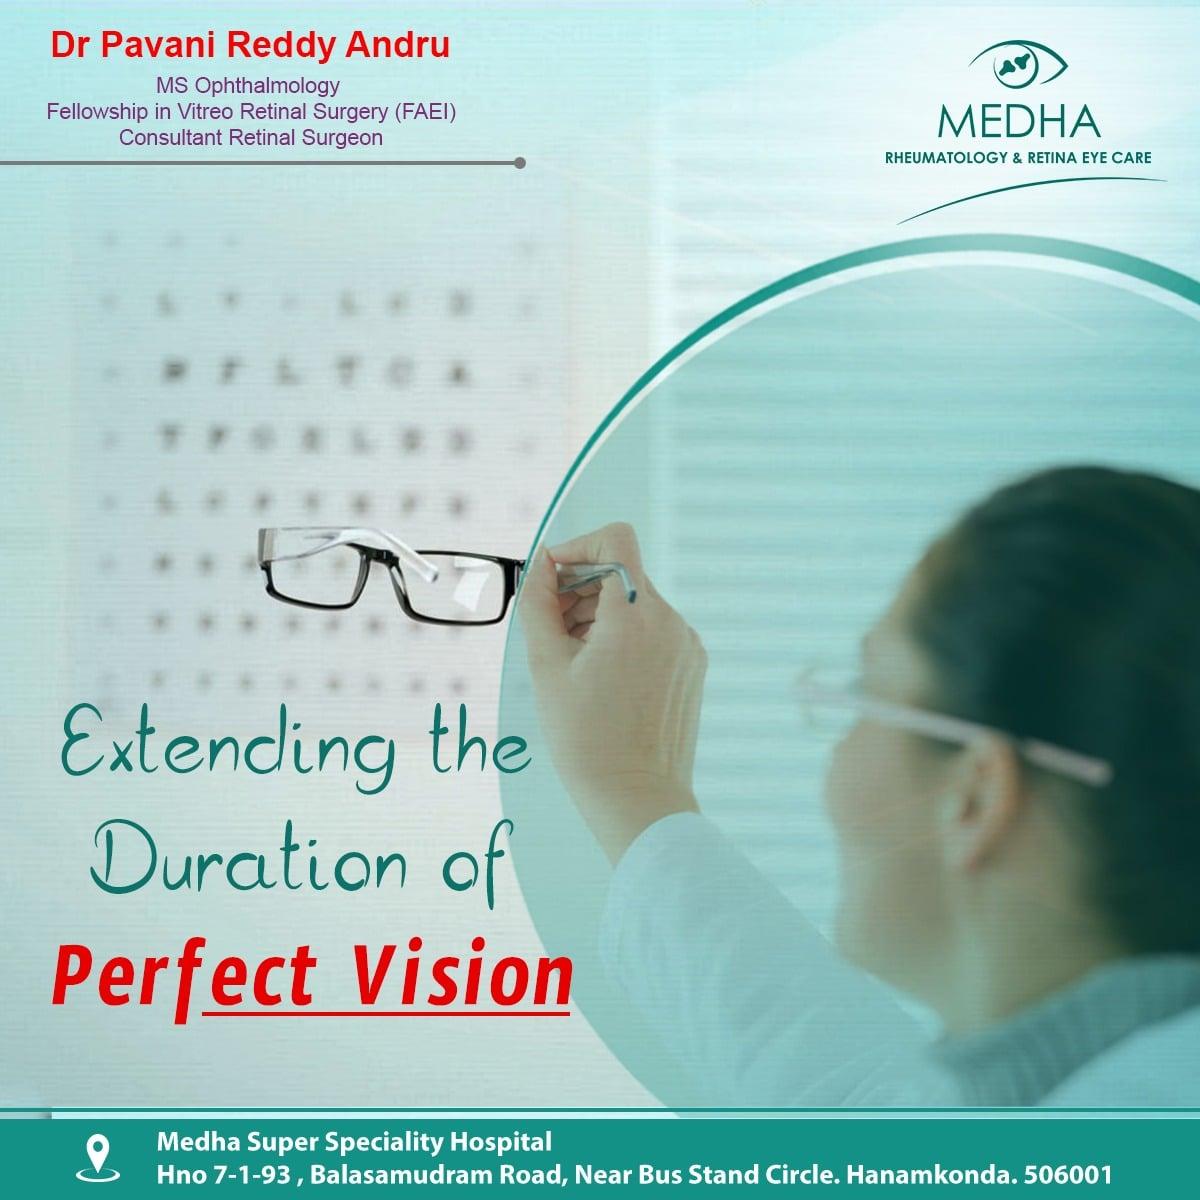 Extending the duration of Perfect Vision